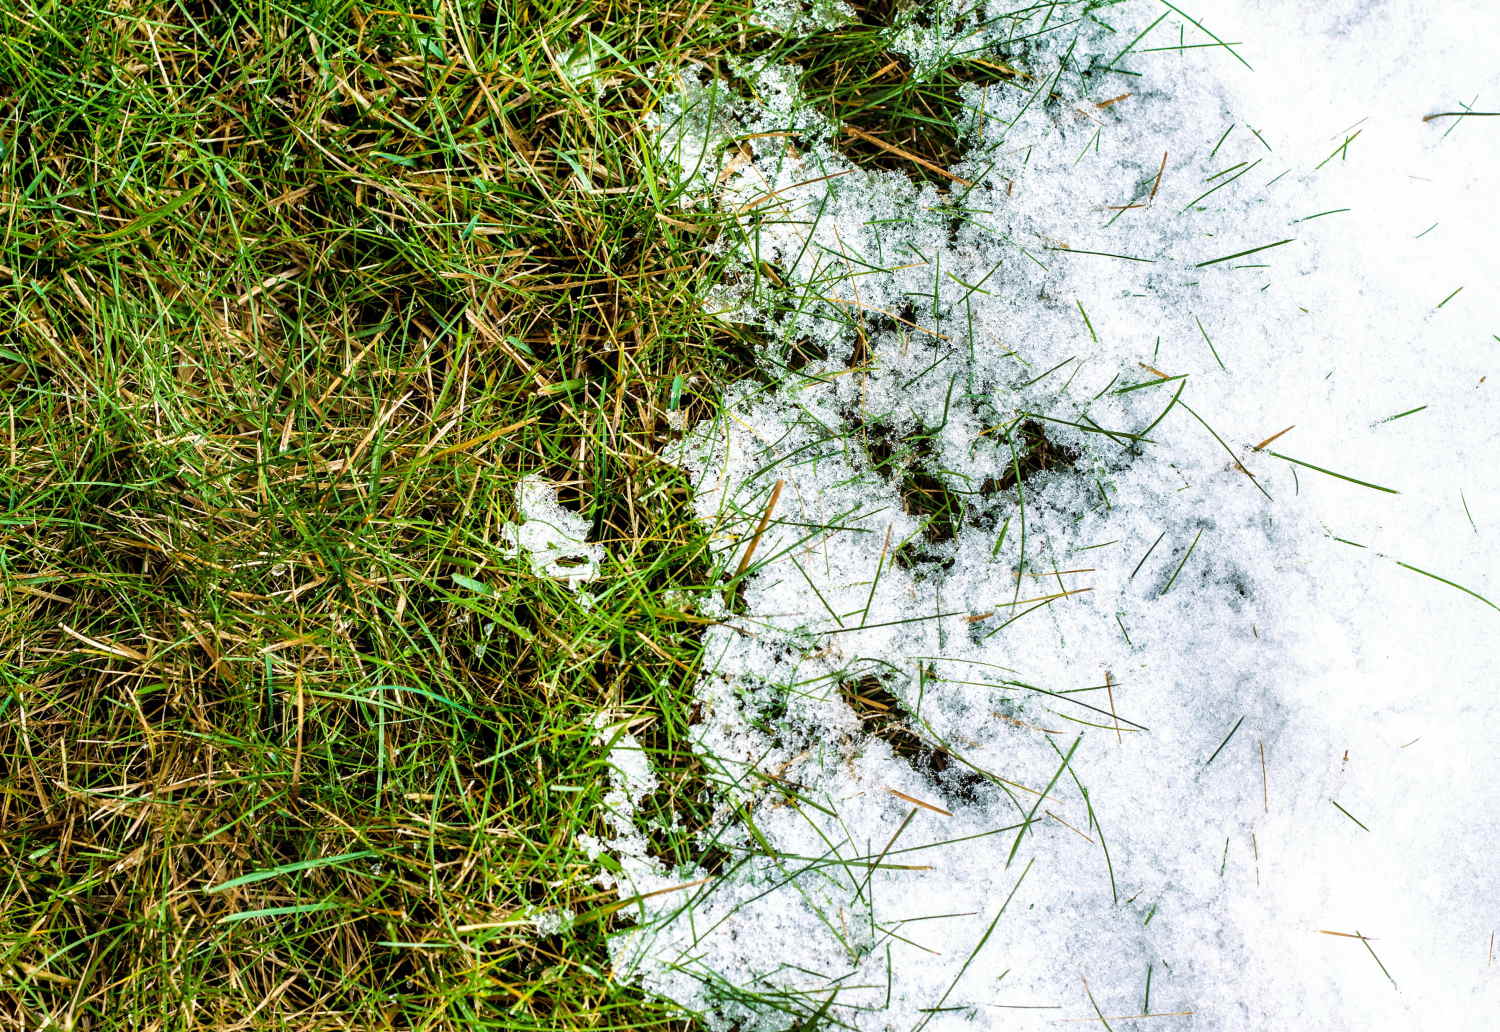 How to repair your lawn after the winter